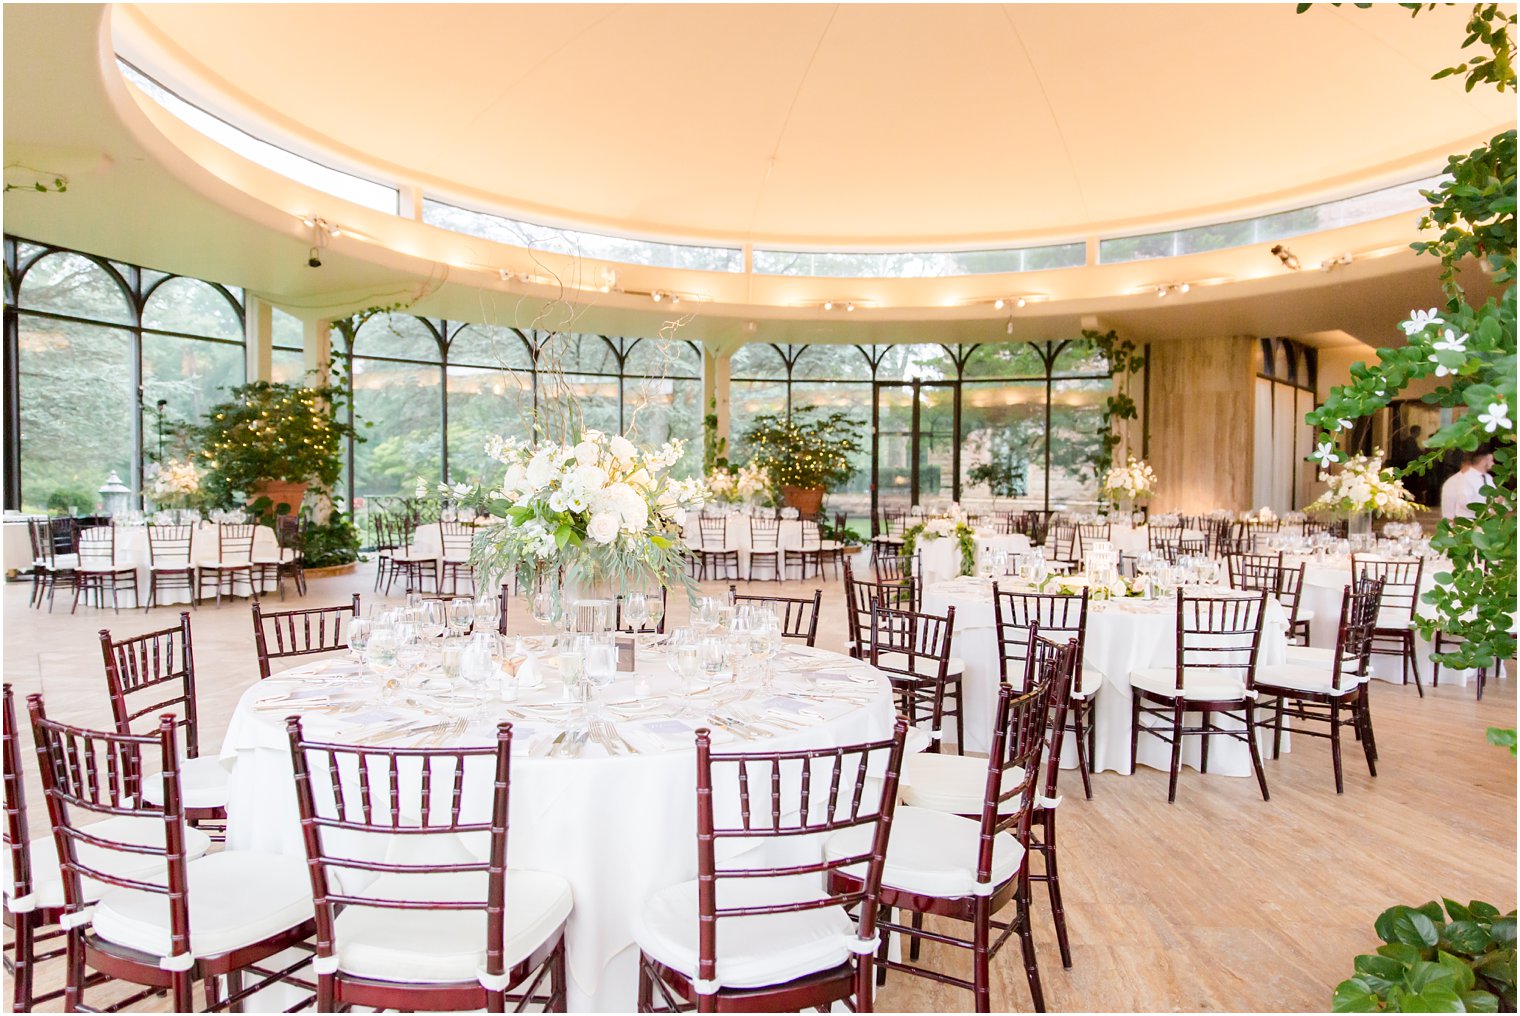 white and ivory reception space at Jasna Polana for NJ wedding day